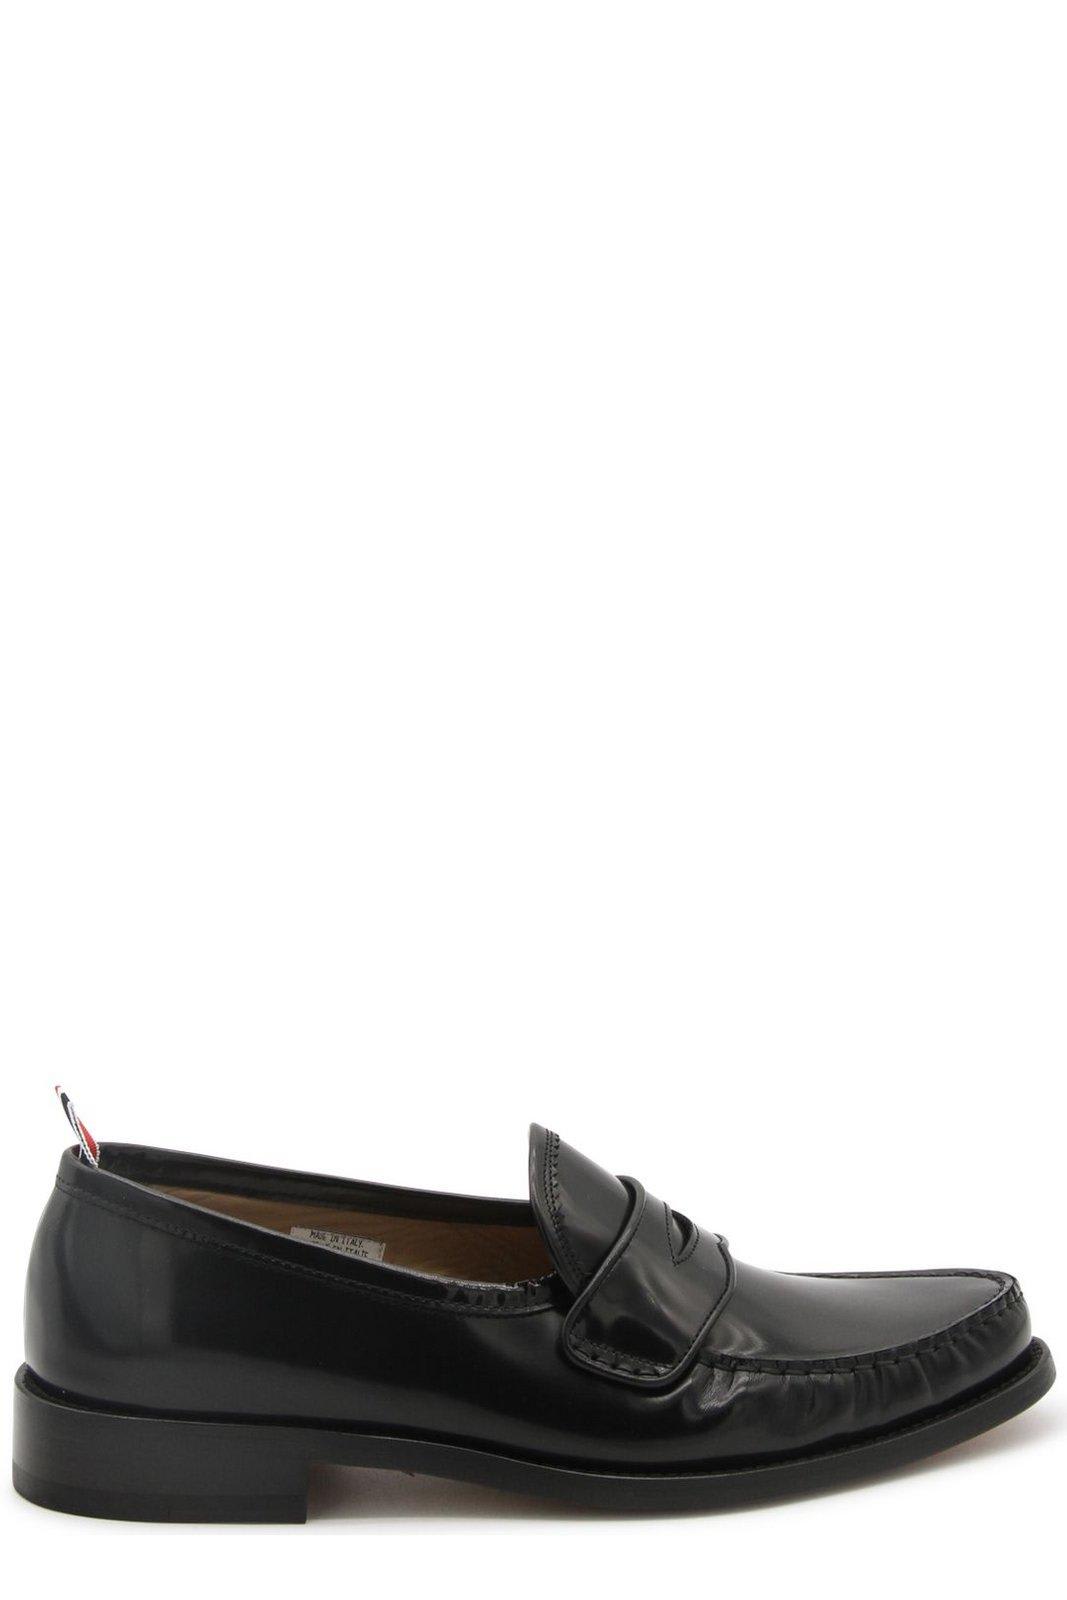 Shop Thom Browne Almond Toe Penny-slot Loafers In Black